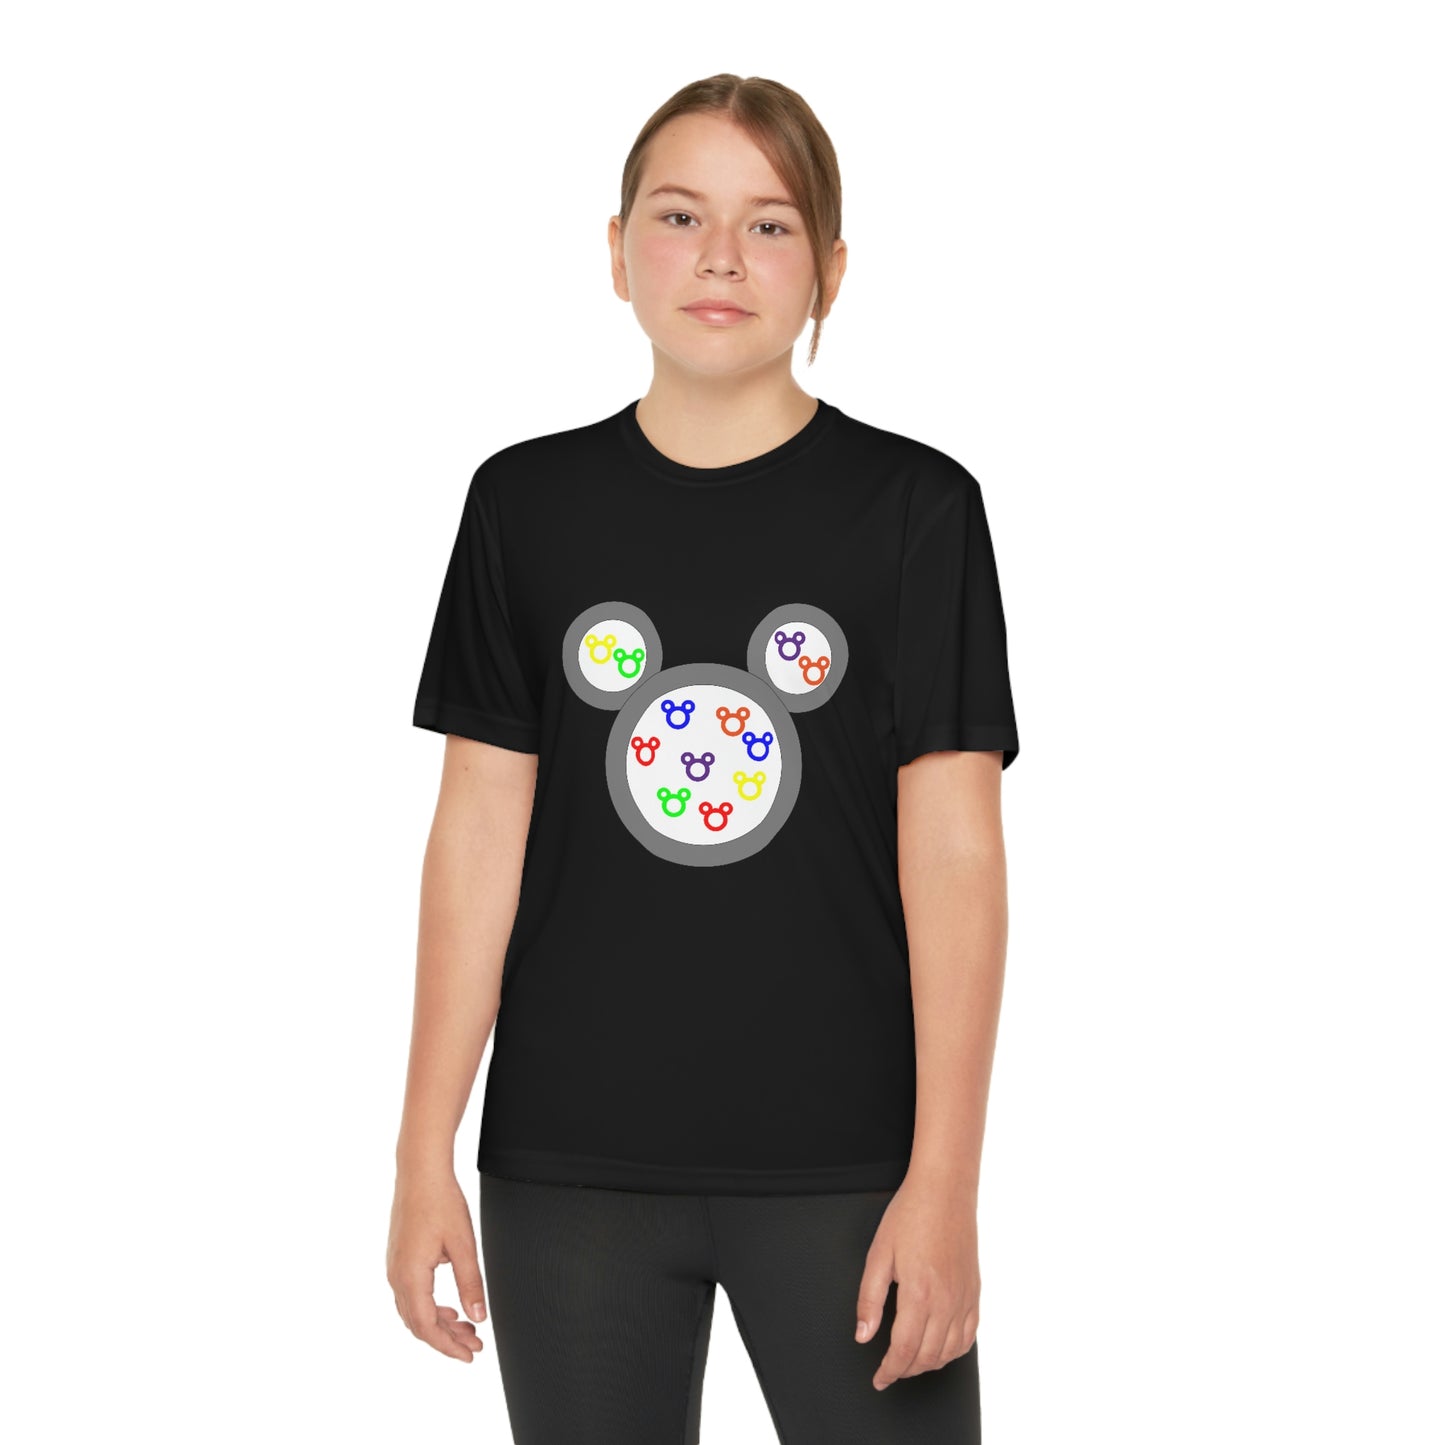 Cereal Mickey T-shirt